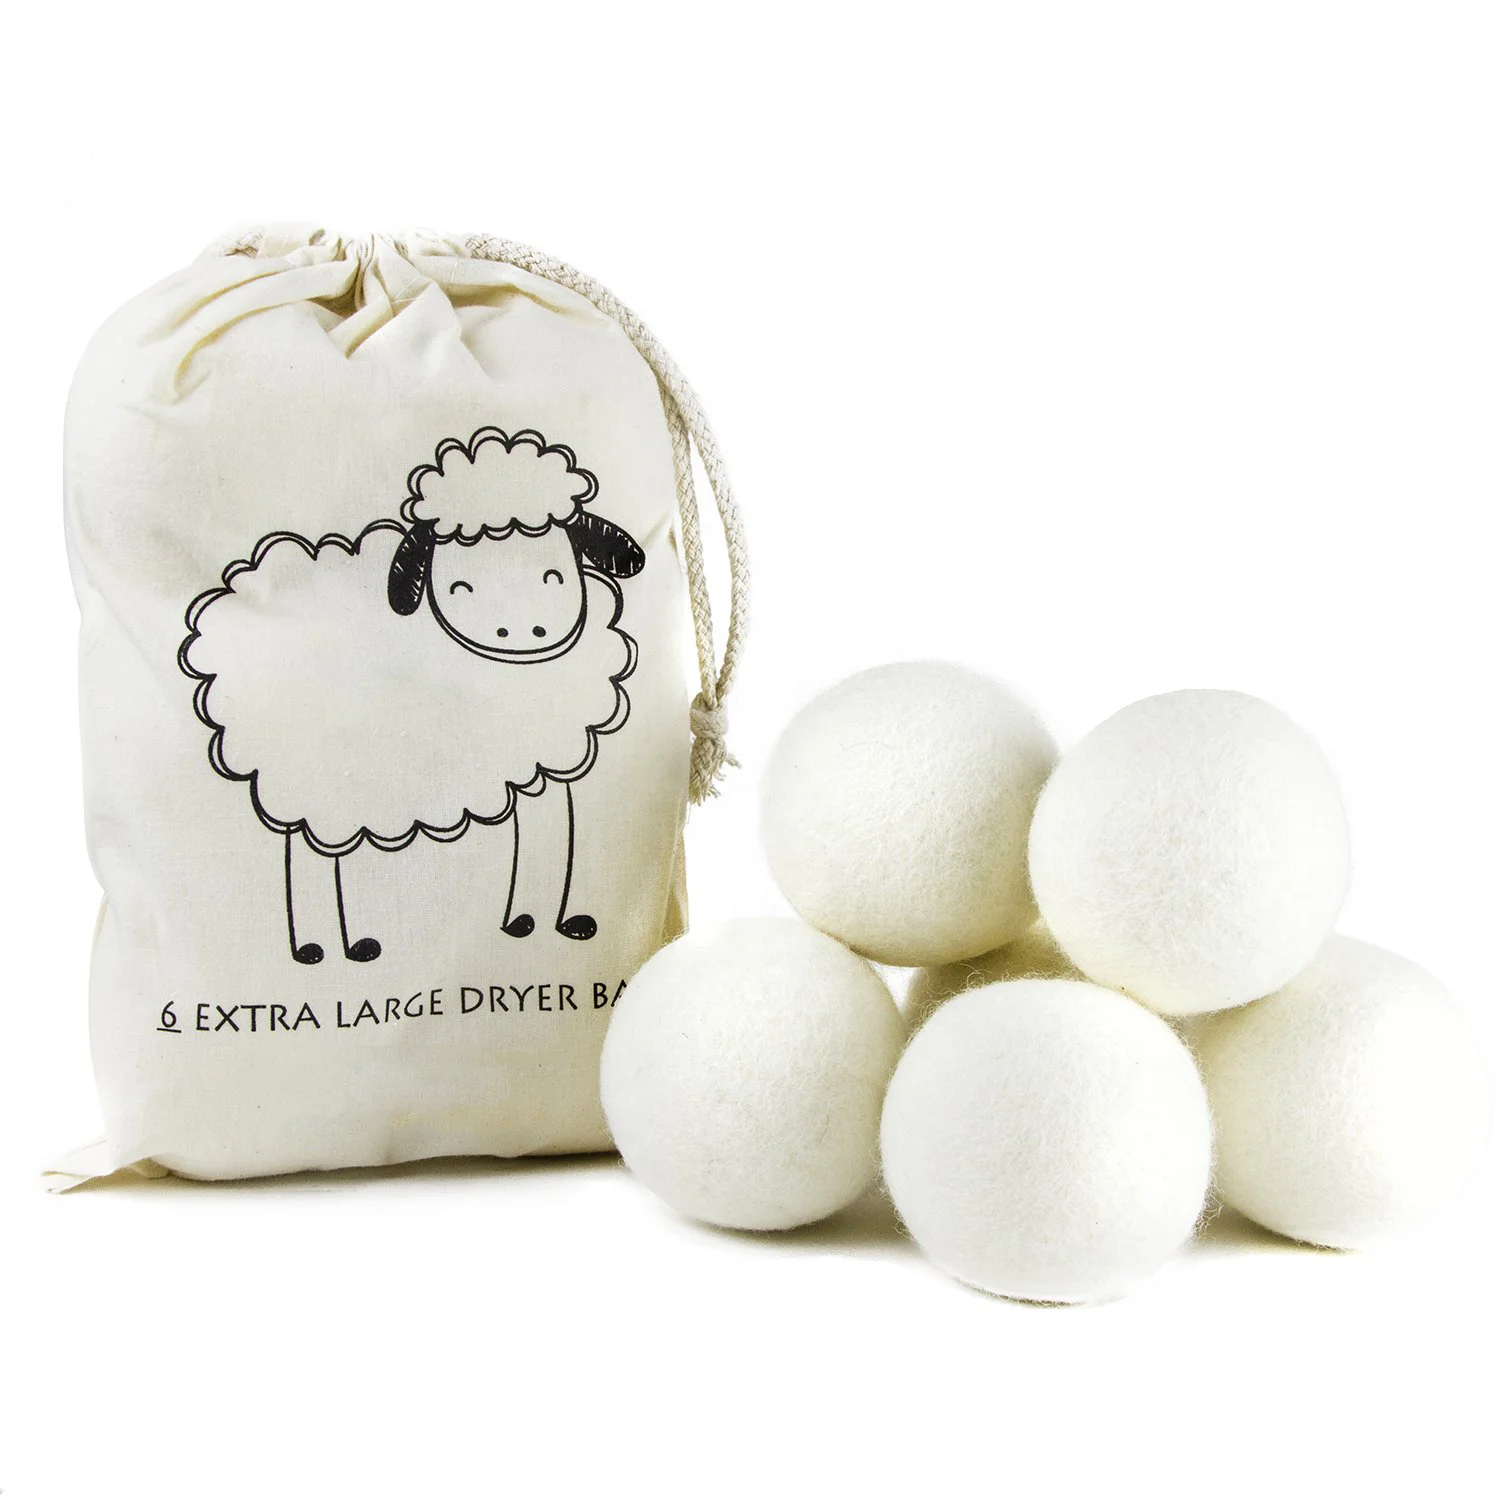 

6-Pack XL 100% New Zealand Wool Dryer Balls wholesale wool dryer balls with FBA DDP service, Nature white,gray,customized